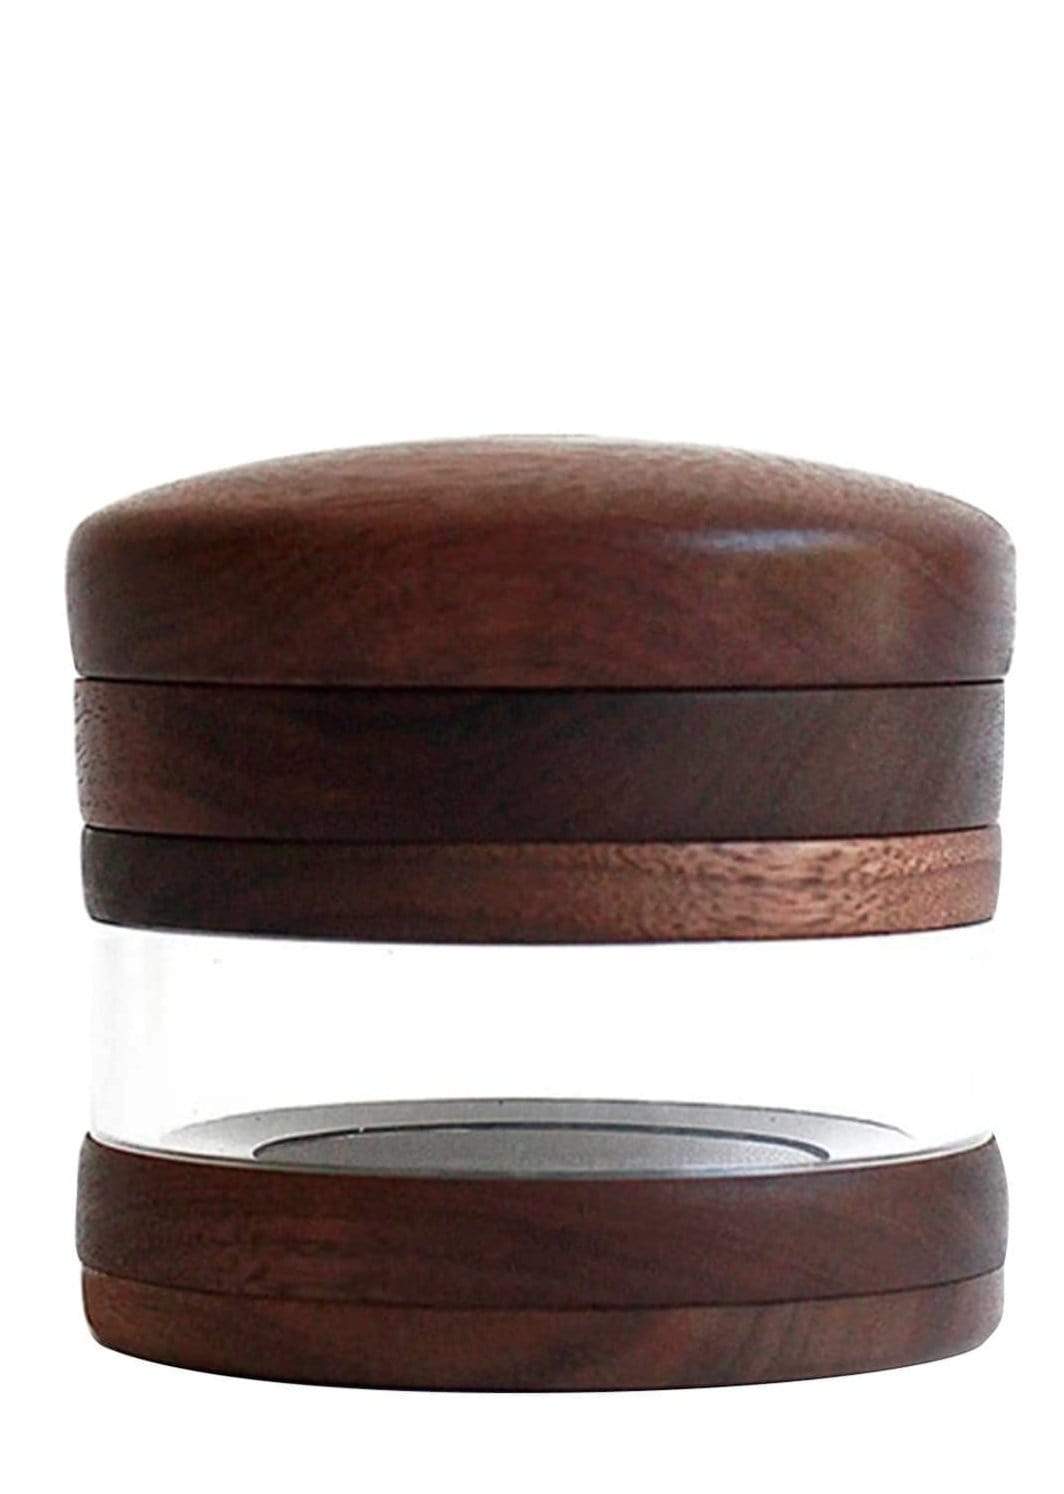 Marley Natural Wooden Grinder Jar, Large 4-Part Design, Thick Glass and Wood, USA Made